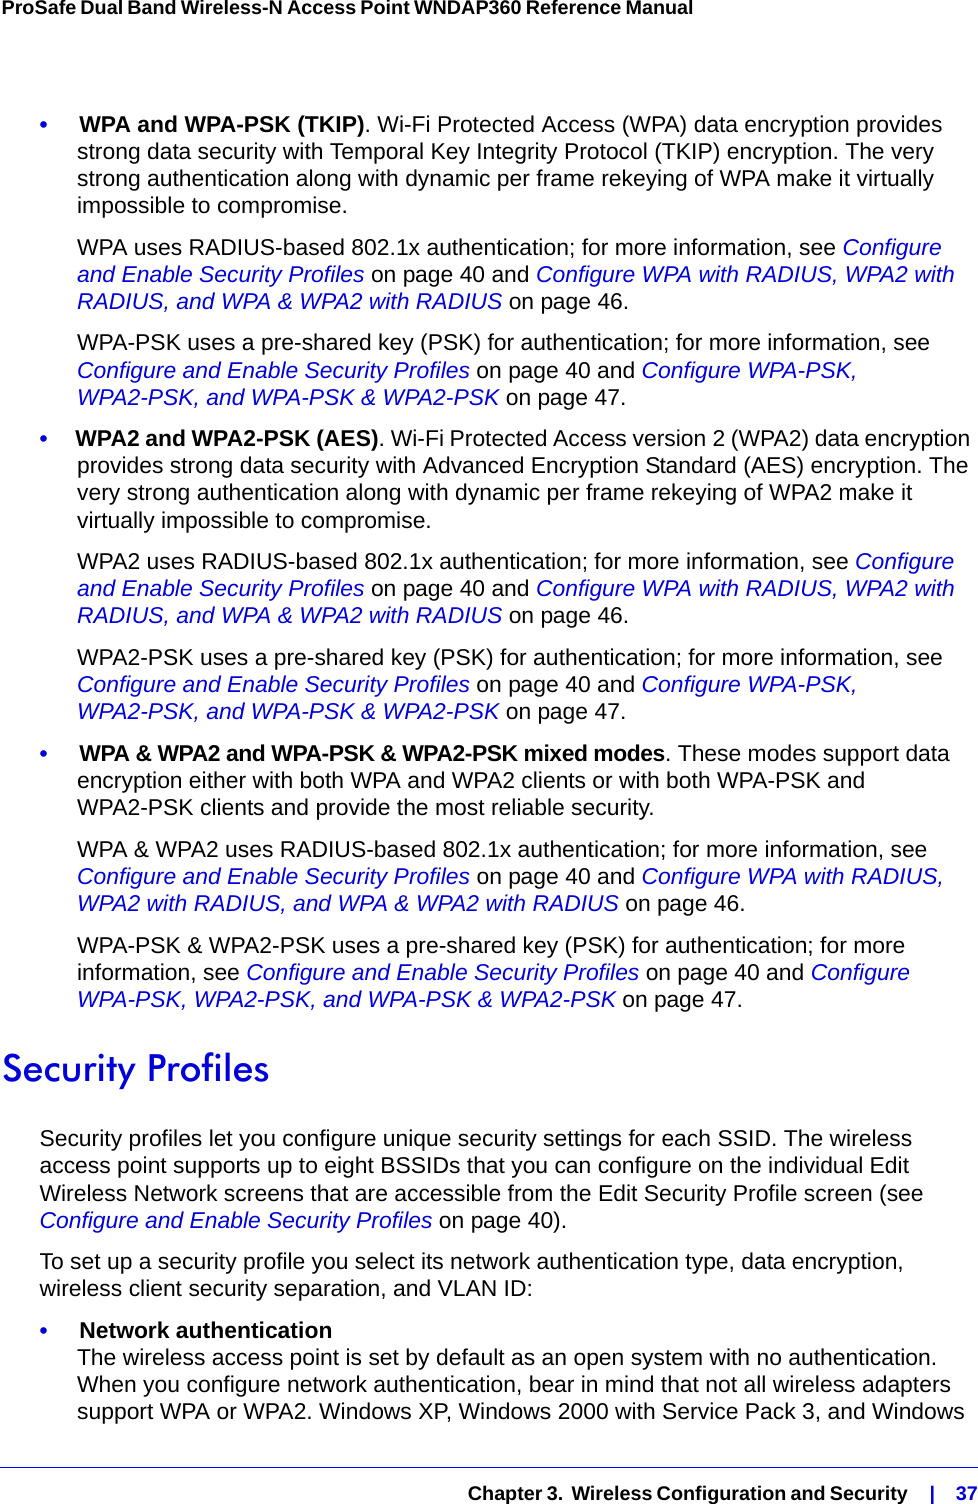   Chapter 3.  Wireless Configuration and Security    |    37ProSafe Dual Band Wireless-N Access Point WNDAP360 Reference Manual •     WPA and WPA-PSK (TKIP). Wi-Fi Protected Access (WPA) data encryption provides strong data security with Temporal Key Integrity Protocol (TKIP) encryption. The very strong authentication along with dynamic per frame rekeying of WPA make it virtually impossible to compromise. WPA uses RADIUS-based 802.1x authentication; for more information, see Configure and Enable Security Profiles on page 40 and Configure WPA with RADIUS, WPA2 with RADIUS, and WPA &amp; WPA2 with RADIUS on page 46. WPA-PSK uses a pre-shared key (PSK) for authentication; for more information, see Configure and Enable Security Profiles on page 40 and Configure WPA-PSK, WPA2-PSK, and WPA-PSK &amp; WPA2-PSK on page 47.•     WPA2 and WPA2-PSK (AES). Wi-Fi Protected Access version 2 (WPA2) data encryption provides strong data security with Advanced Encryption Standard (AES) encryption. The very strong authentication along with dynamic per frame rekeying of WPA2 make it virtually impossible to compromise. WPA2 uses RADIUS-based 802.1x authentication; for more information, see Configure and Enable Security Profiles on page 40 and Configure WPA with RADIUS, WPA2 with RADIUS, and WPA &amp; WPA2 with RADIUS on page 46. WPA2-PSK uses a pre-shared key (PSK) for authentication; for more information, see Configure and Enable Security Profiles on page 40 and Configure WPA-PSK, WPA2-PSK, and WPA-PSK &amp; WPA2-PSK on page 47.•     WPA &amp; WPA2 and WPA-PSK &amp; WPA2-PSK mixed modes. These modes support data encryption either with both WPA and WPA2 clients or with both WPA-PSK and WPA2-PSK clients and provide the most reliable security.WPA &amp; WPA2 uses RADIUS-based 802.1x authentication; for more information, see Configure and Enable Security Profiles on page 40 and Configure WPA with RADIUS, WPA2 with RADIUS, and WPA &amp; WPA2 with RADIUS on page 46. WPA-PSK &amp; WPA2-PSK uses a pre-shared key (PSK) for authentication; for more information, see Configure and Enable Security Profiles on page 40 and Configure WPA-PSK, WPA2-PSK, and WPA-PSK &amp; WPA2-PSK on page 47.Security ProfilesSecurity profiles let you configure unique security settings for each SSID. The wireless access point supports up to eight BSSIDs that you can configure on the individual Edit Wireless Network screens that are accessible from the Edit Security Profile screen (see Configure and Enable Security Profiles on page 40). To set up a security profile you select its network authentication type, data encryption, wireless client security separation, and VLAN ID:•     Network authentication The wireless access point is set by default as an open system with no authentication. When you configure network authentication, bear in mind that not all wireless adapters support WPA or WPA2. Windows XP, Windows 2000 with Service Pack 3, and Windows 